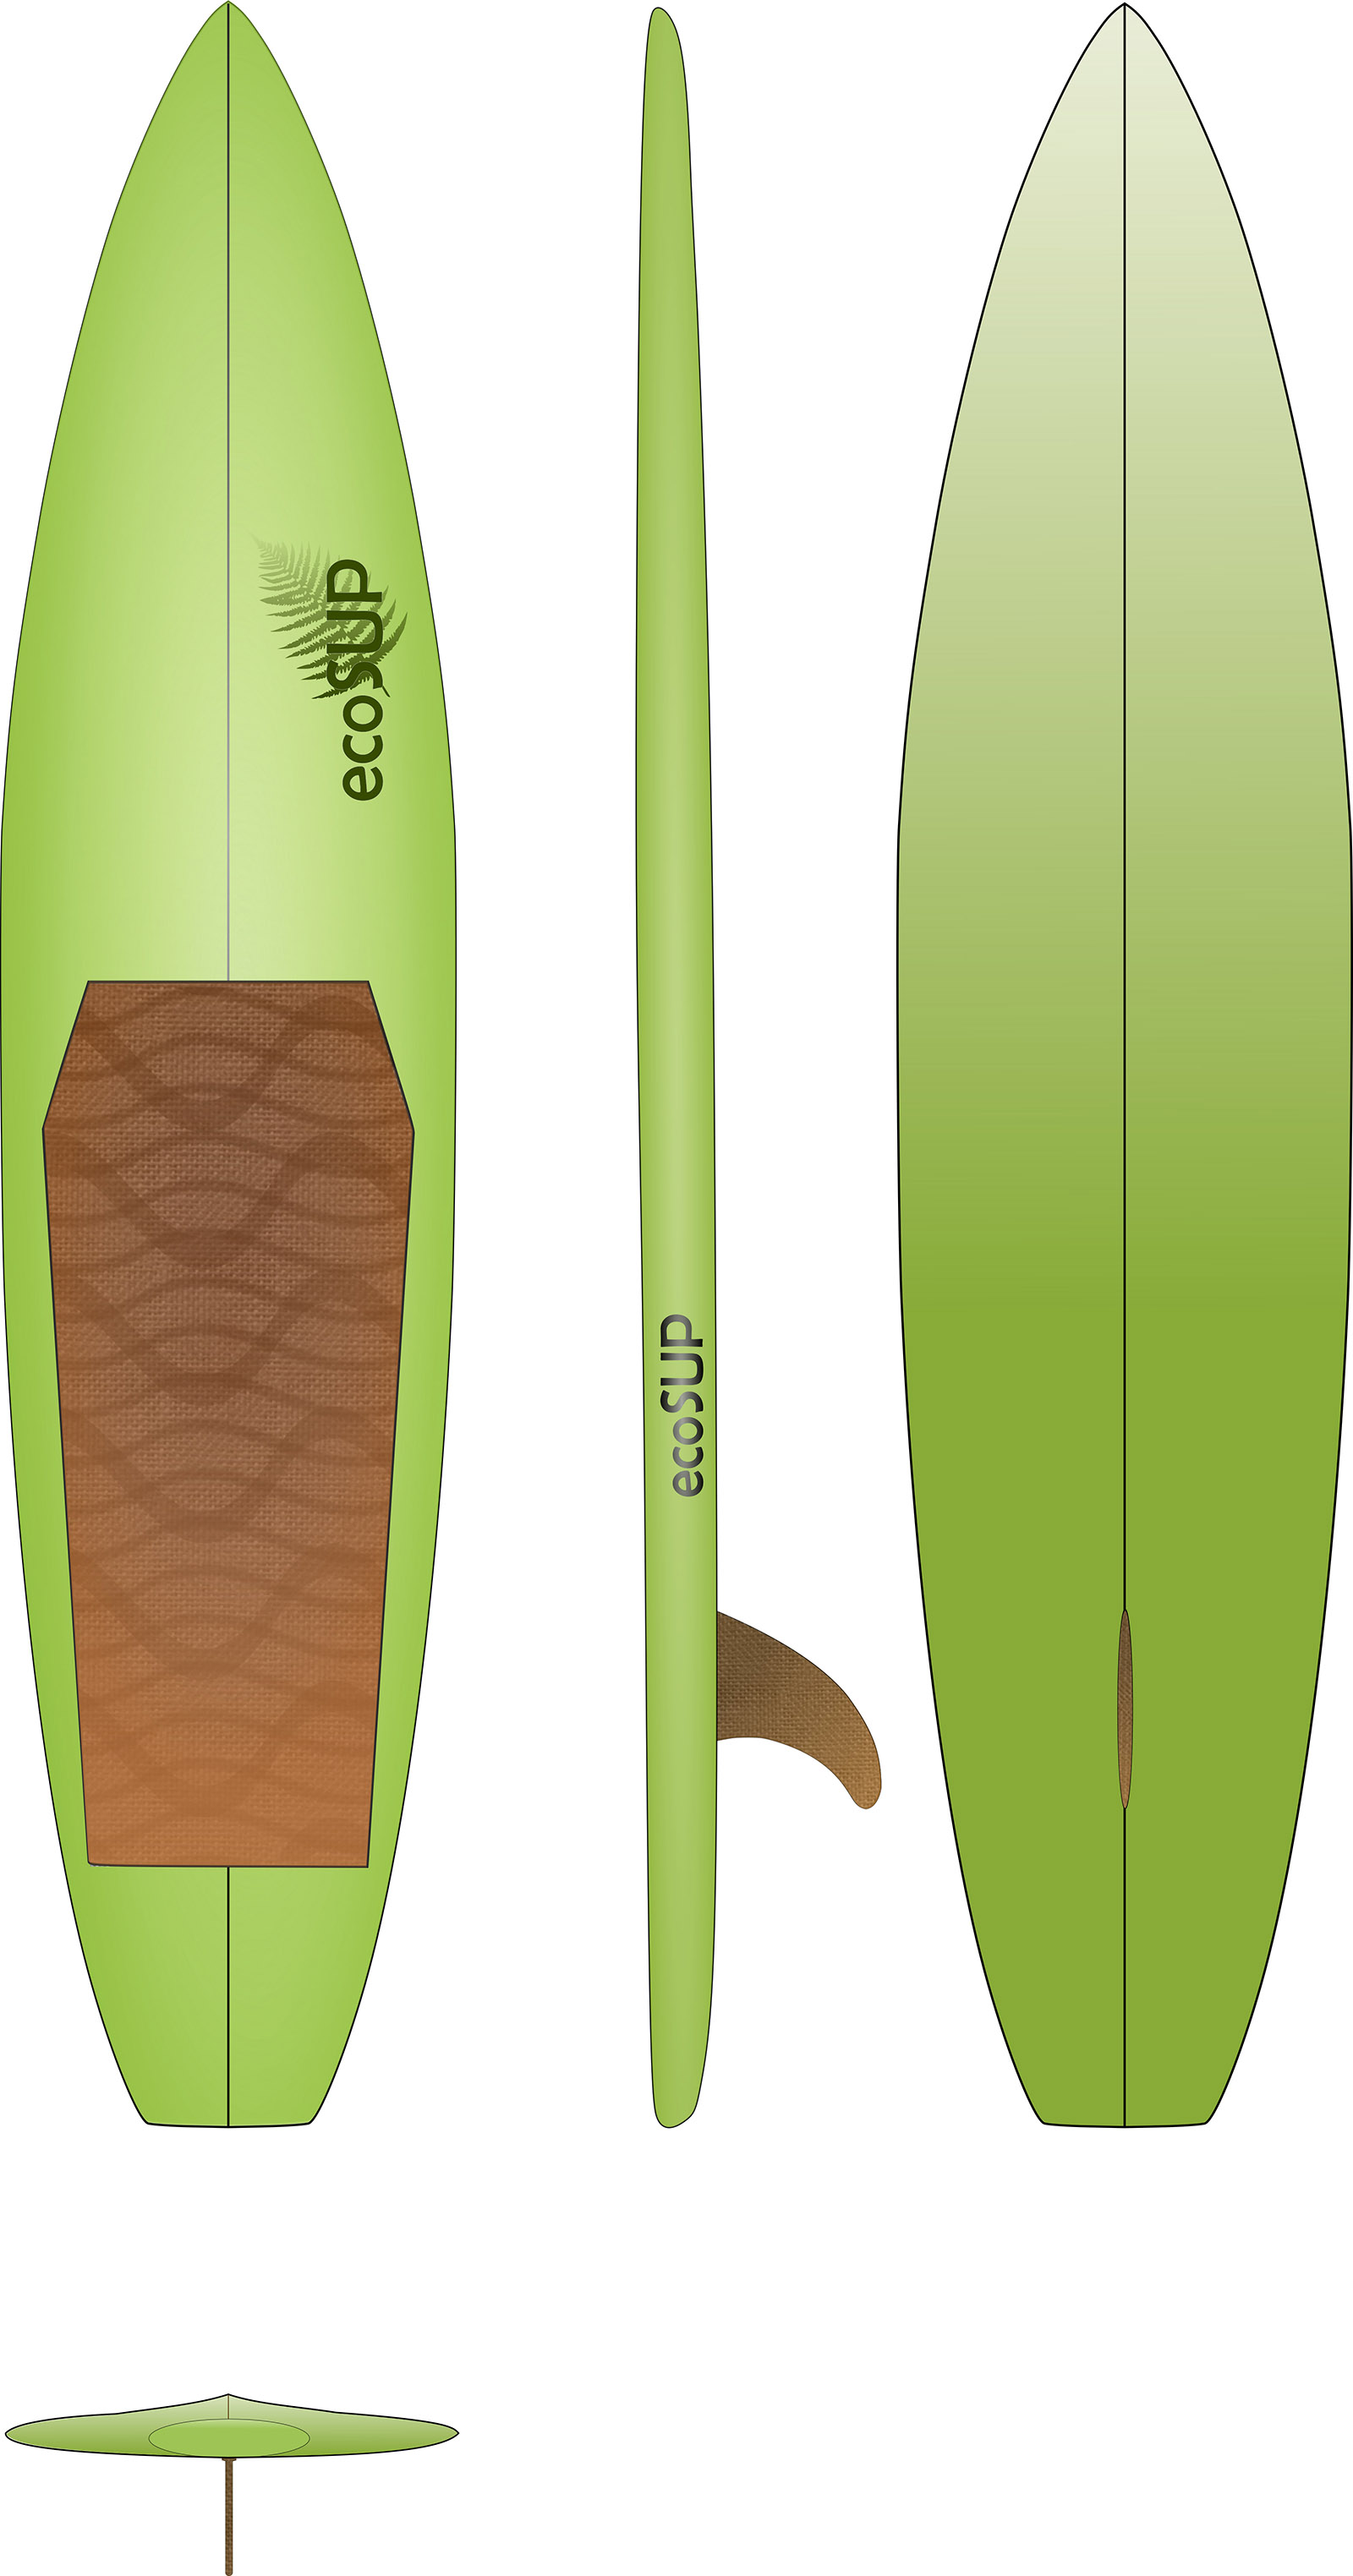 ecoSUP-board design: Concept image of the eco-SUP.